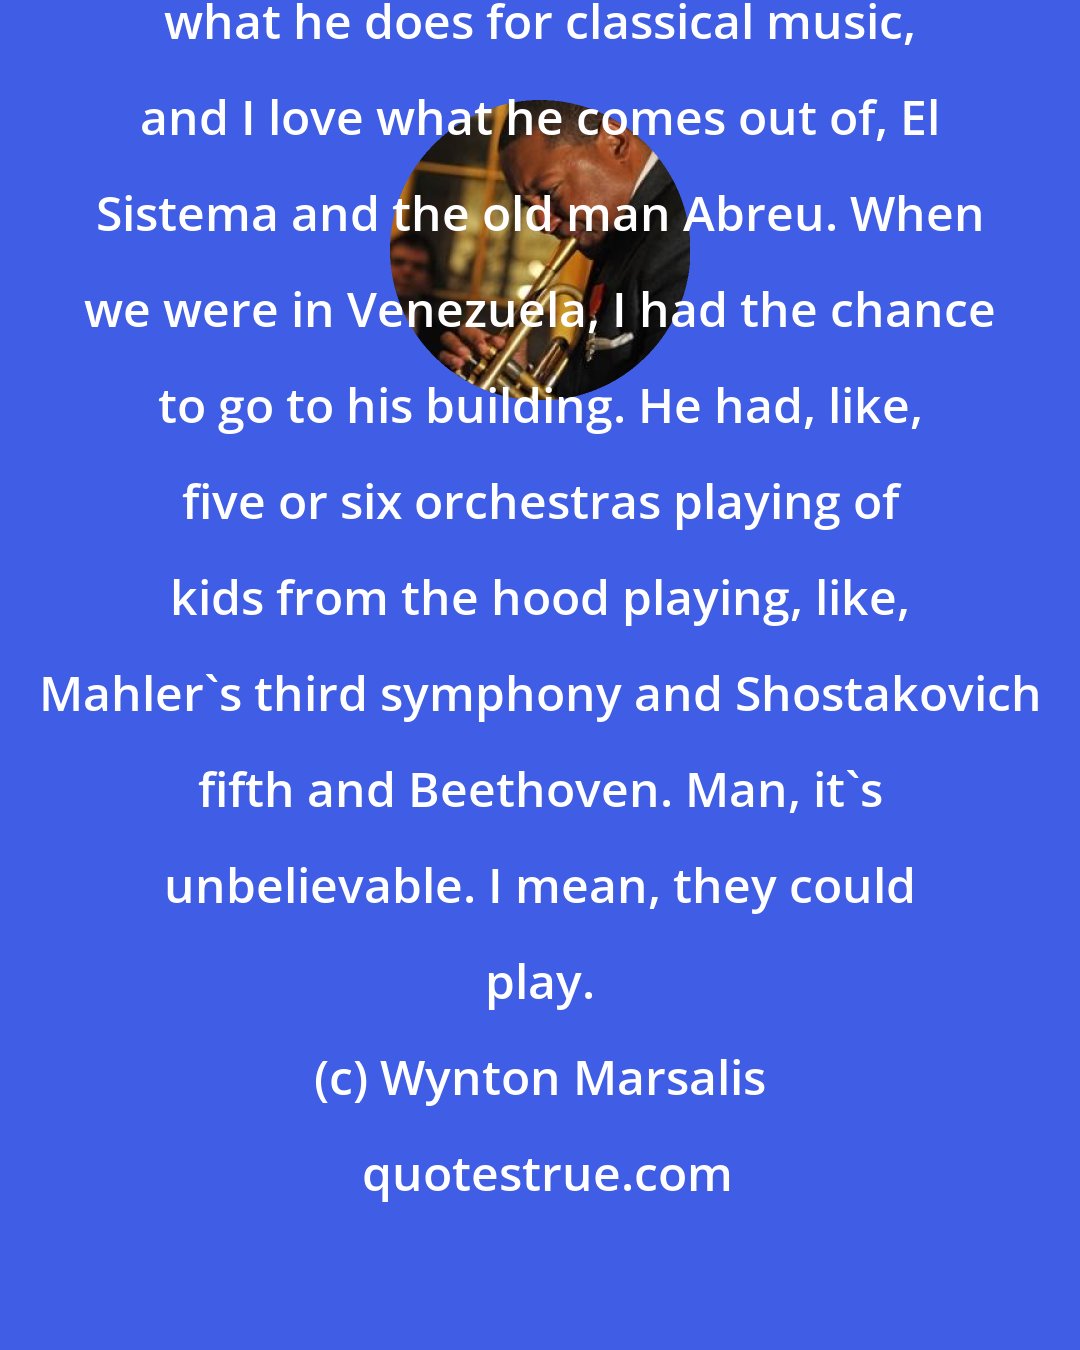 Wynton Marsalis: I love Gustavo Dudamel and I love what he does for classical music, and I love what he comes out of, El Sistema and the old man Abreu. When we were in Venezuela, I had the chance to go to his building. He had, like, five or six orchestras playing of kids from the hood playing, like, Mahler's third symphony and Shostakovich fifth and Beethoven. Man, it's unbelievable. I mean, they could play.